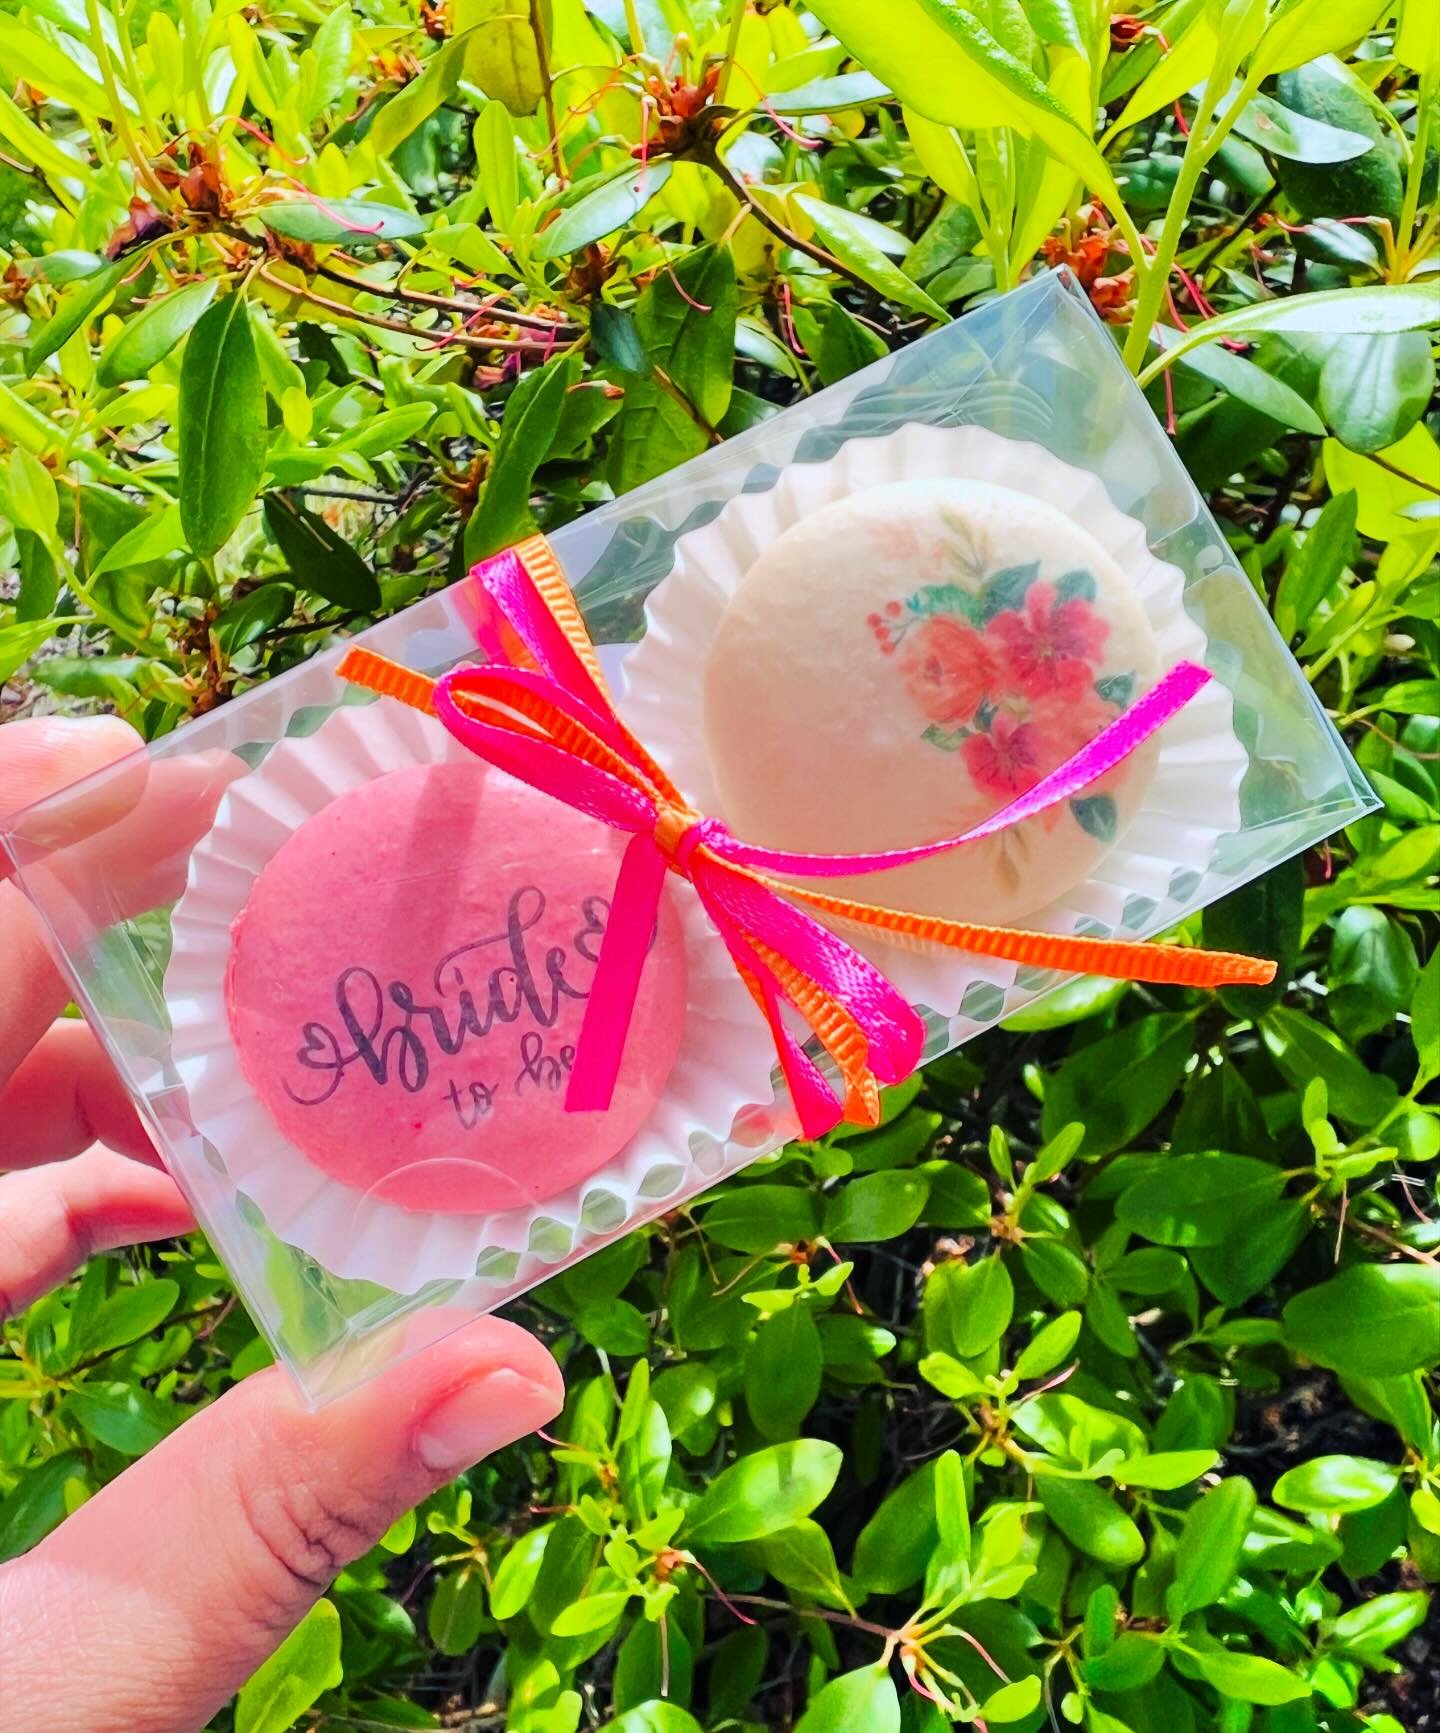 🌸Happy Macaron Monday 🌸

We had the amazing opportunity to make these special macaron favors for a beautiful Bride to Be this past weekend!

We needed to brighten up this gloomy Monday with some Blooming Macarons. We hear the son will be making an 